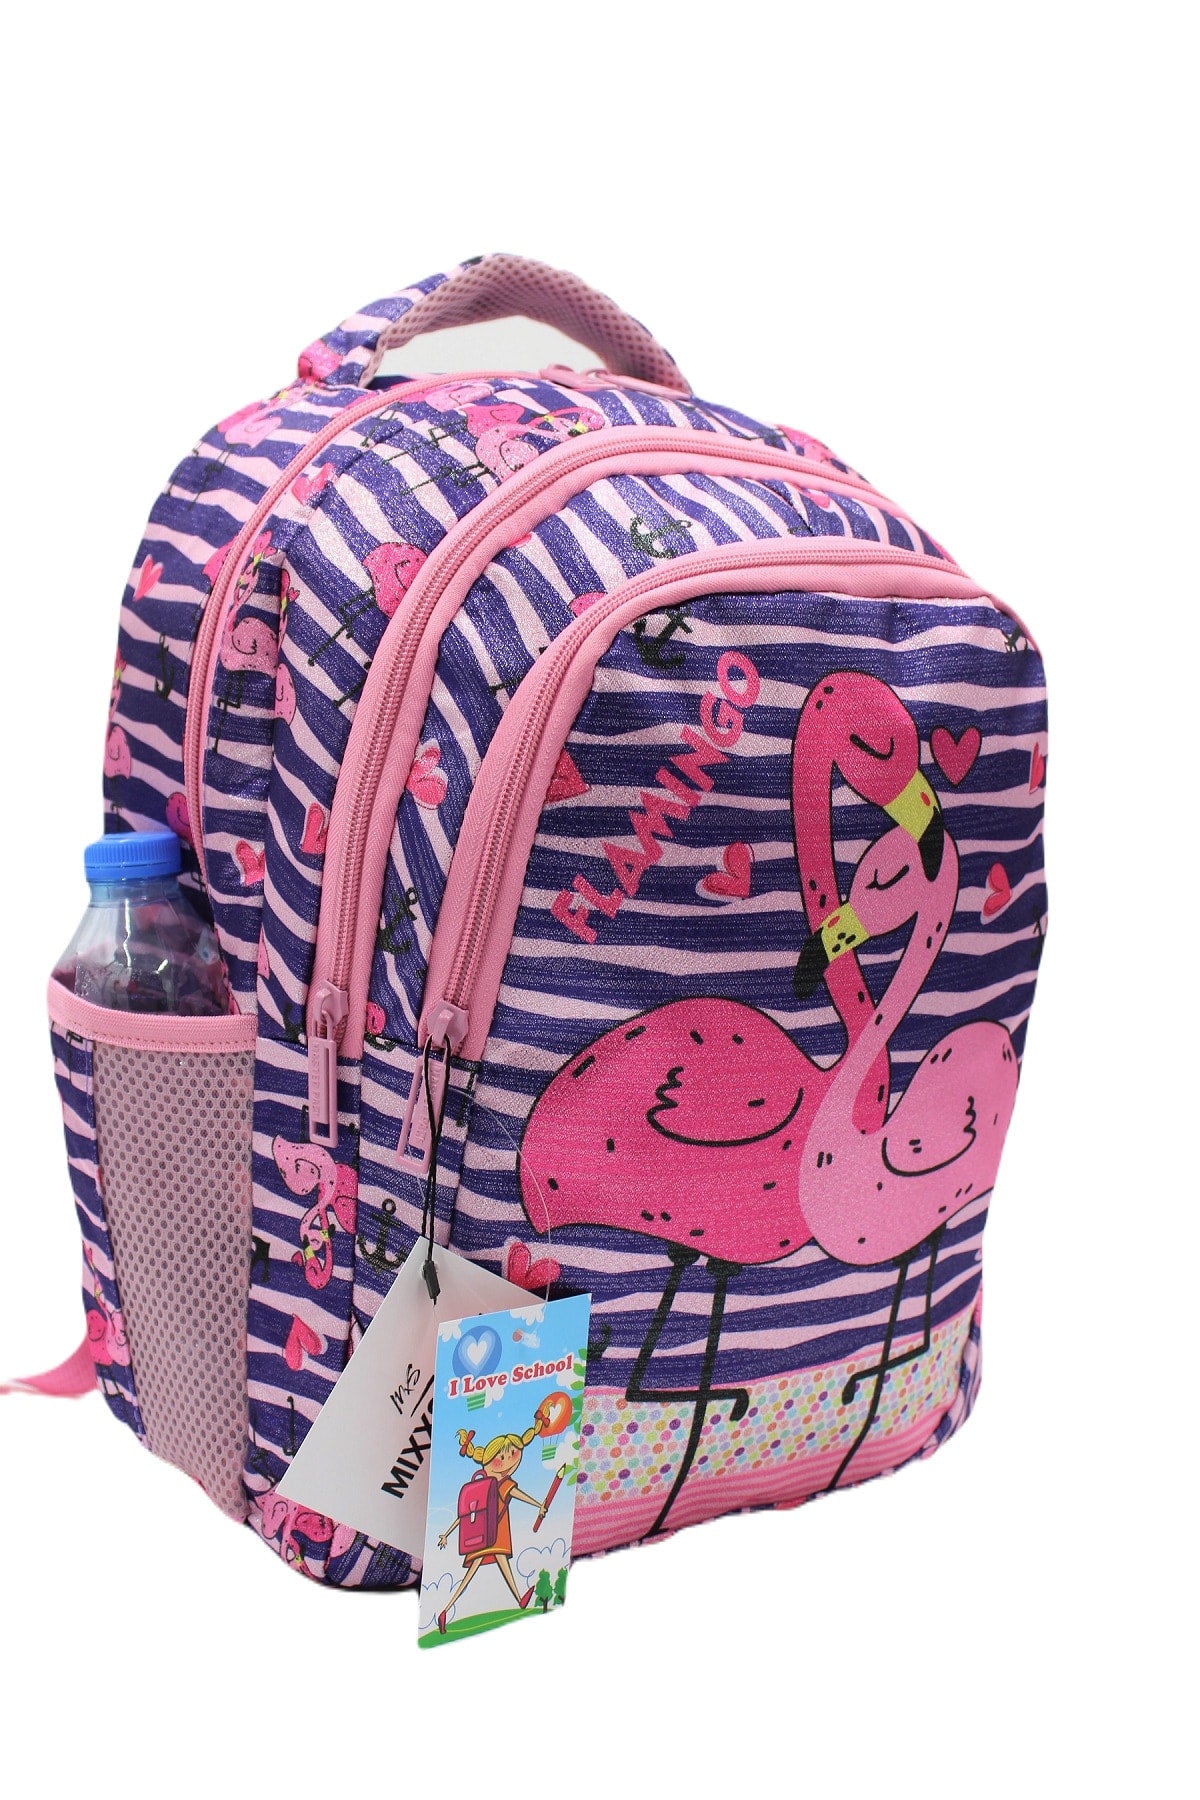 Sim Flamingo Patterned Dark Purple Color Girl Backpack Primary School Bag Set with Lunch Box and Pencil Holder